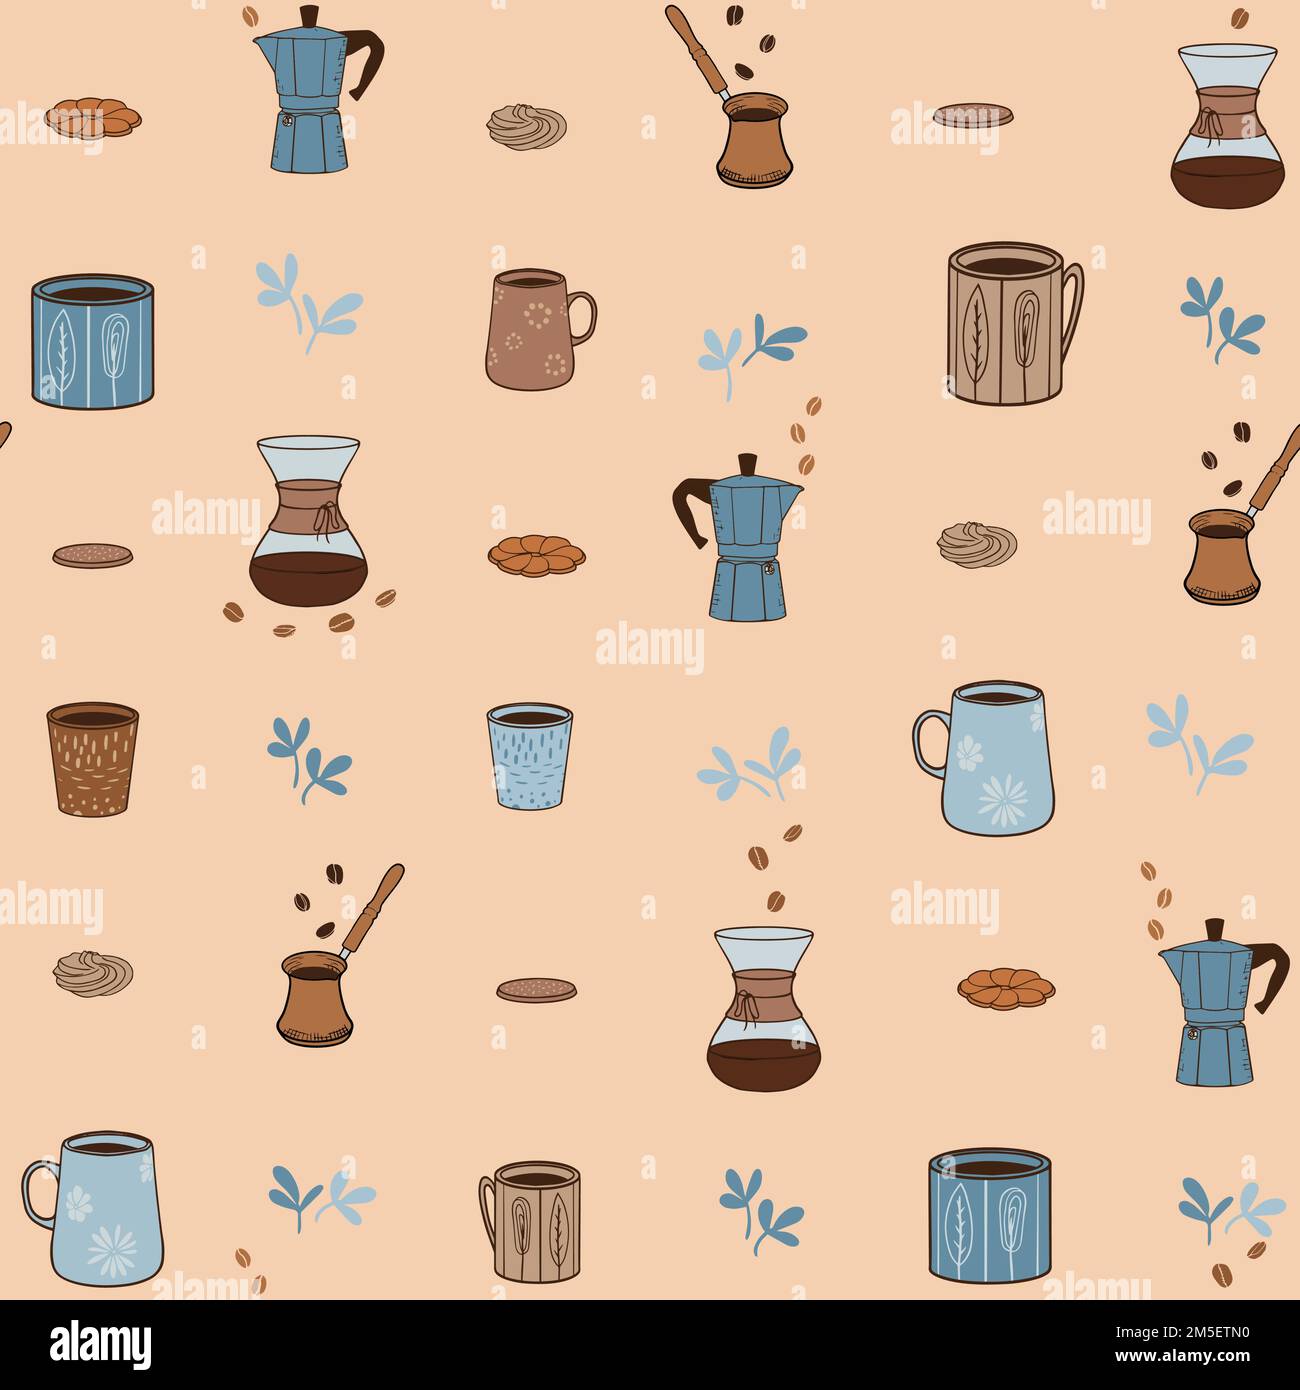 Coffee themed seamless vector pattern. Cups, cookies, coffee beans, manual coffee brewers. Vector illustration. Great for coffee shop, cafe, fika accessories Stock Vector